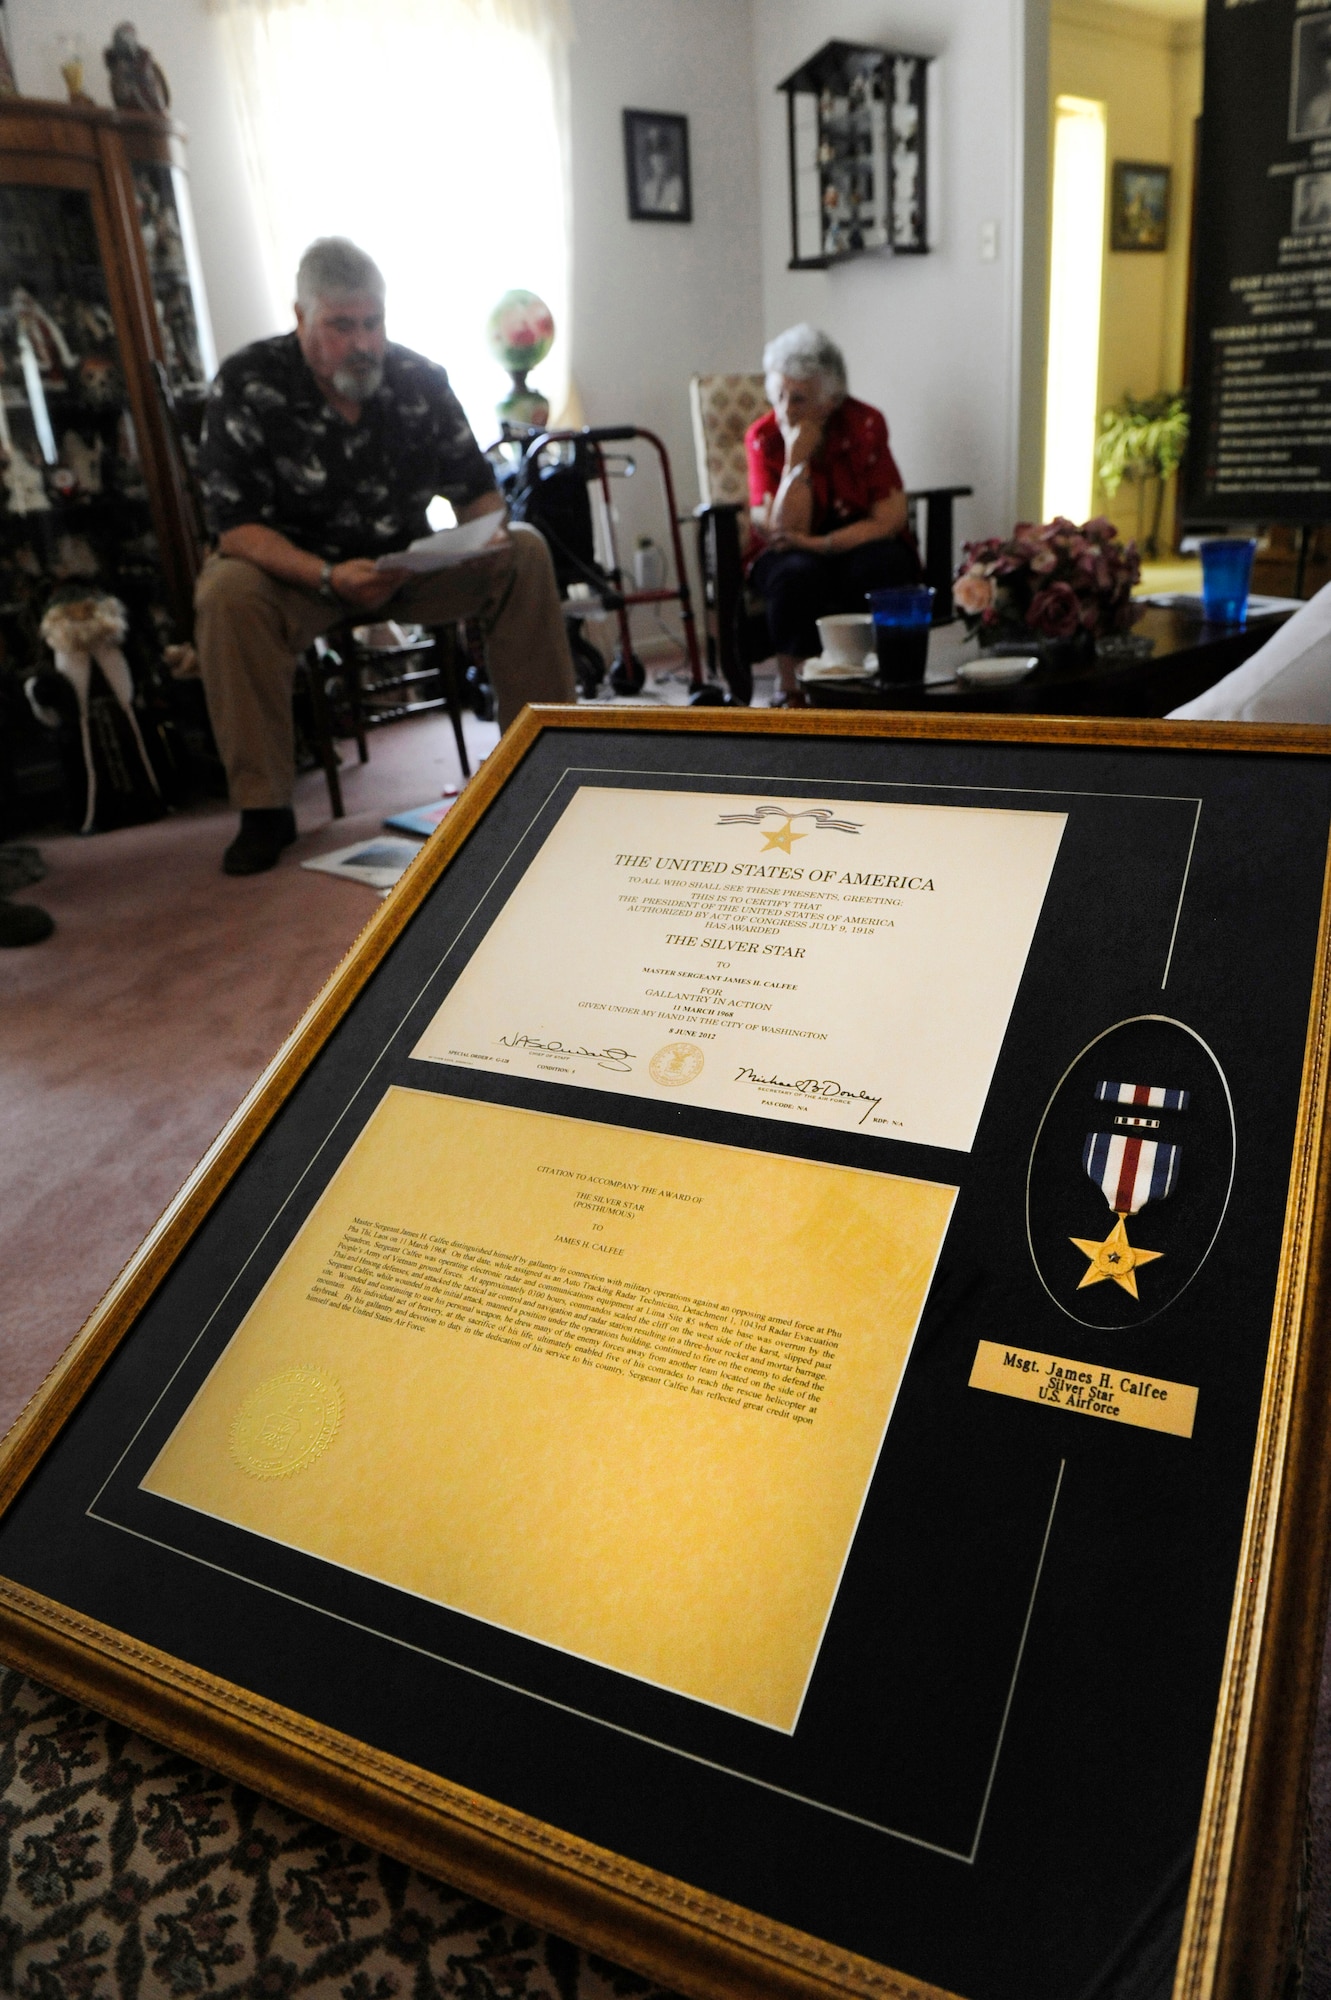 A framed Silver Star Medal and citation sits in the foreground as Rosalie Bacicia, back right, sister of the late Master Sgt. James Calfee, and Delton Kayga, a brother-in-law, look at documents about Calfee in Houston, Texas, Aug. 22, 2012. Calfee, who was posthumously awarded the Silver Star Medal, was killed in action in Laos in 1968. (U.S. Air Force photo/Val Gempis)